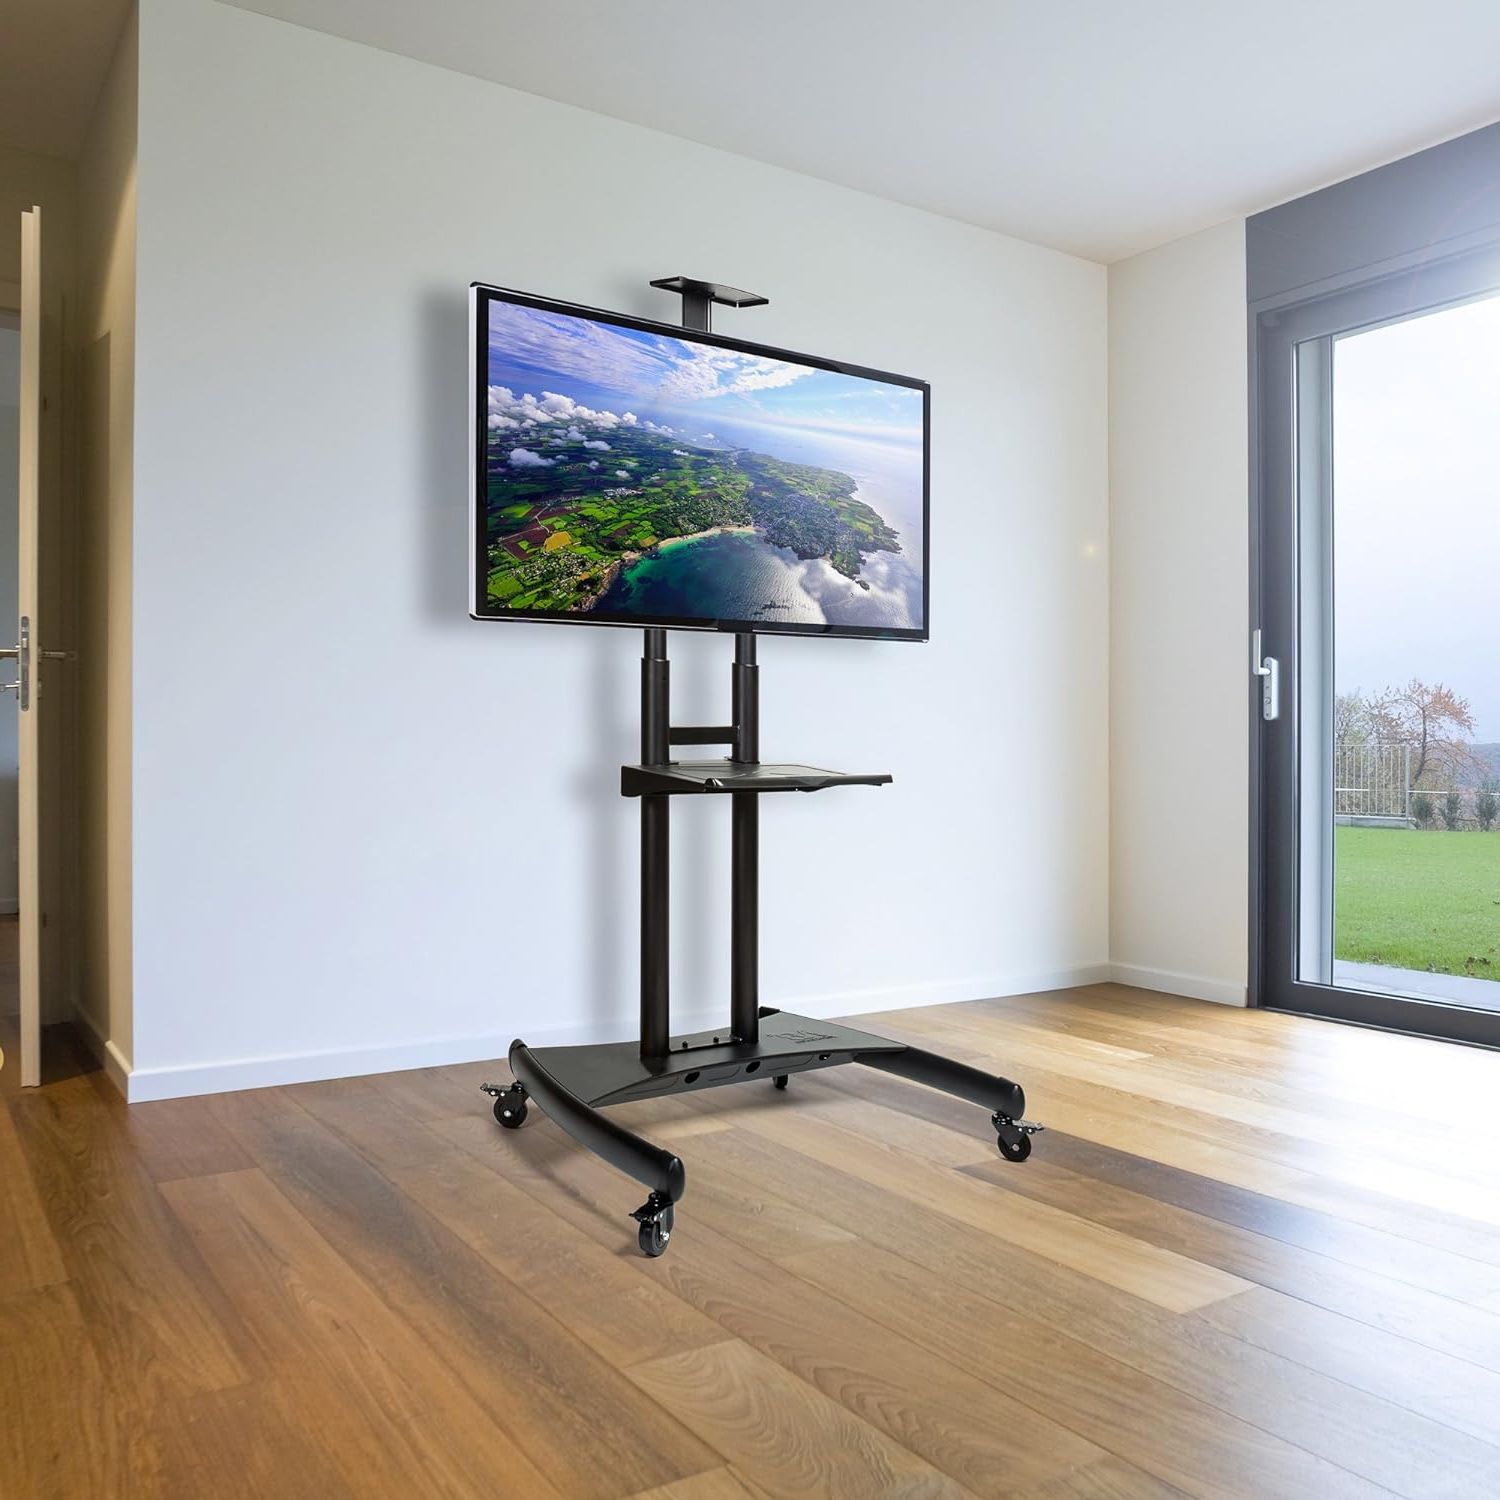 Modern Rolling Tv Stands With Preferred Rolling Tv Stands : Easyfashion Modern Mobile Rolling Tv Stand For Flat (View 12 of 15)